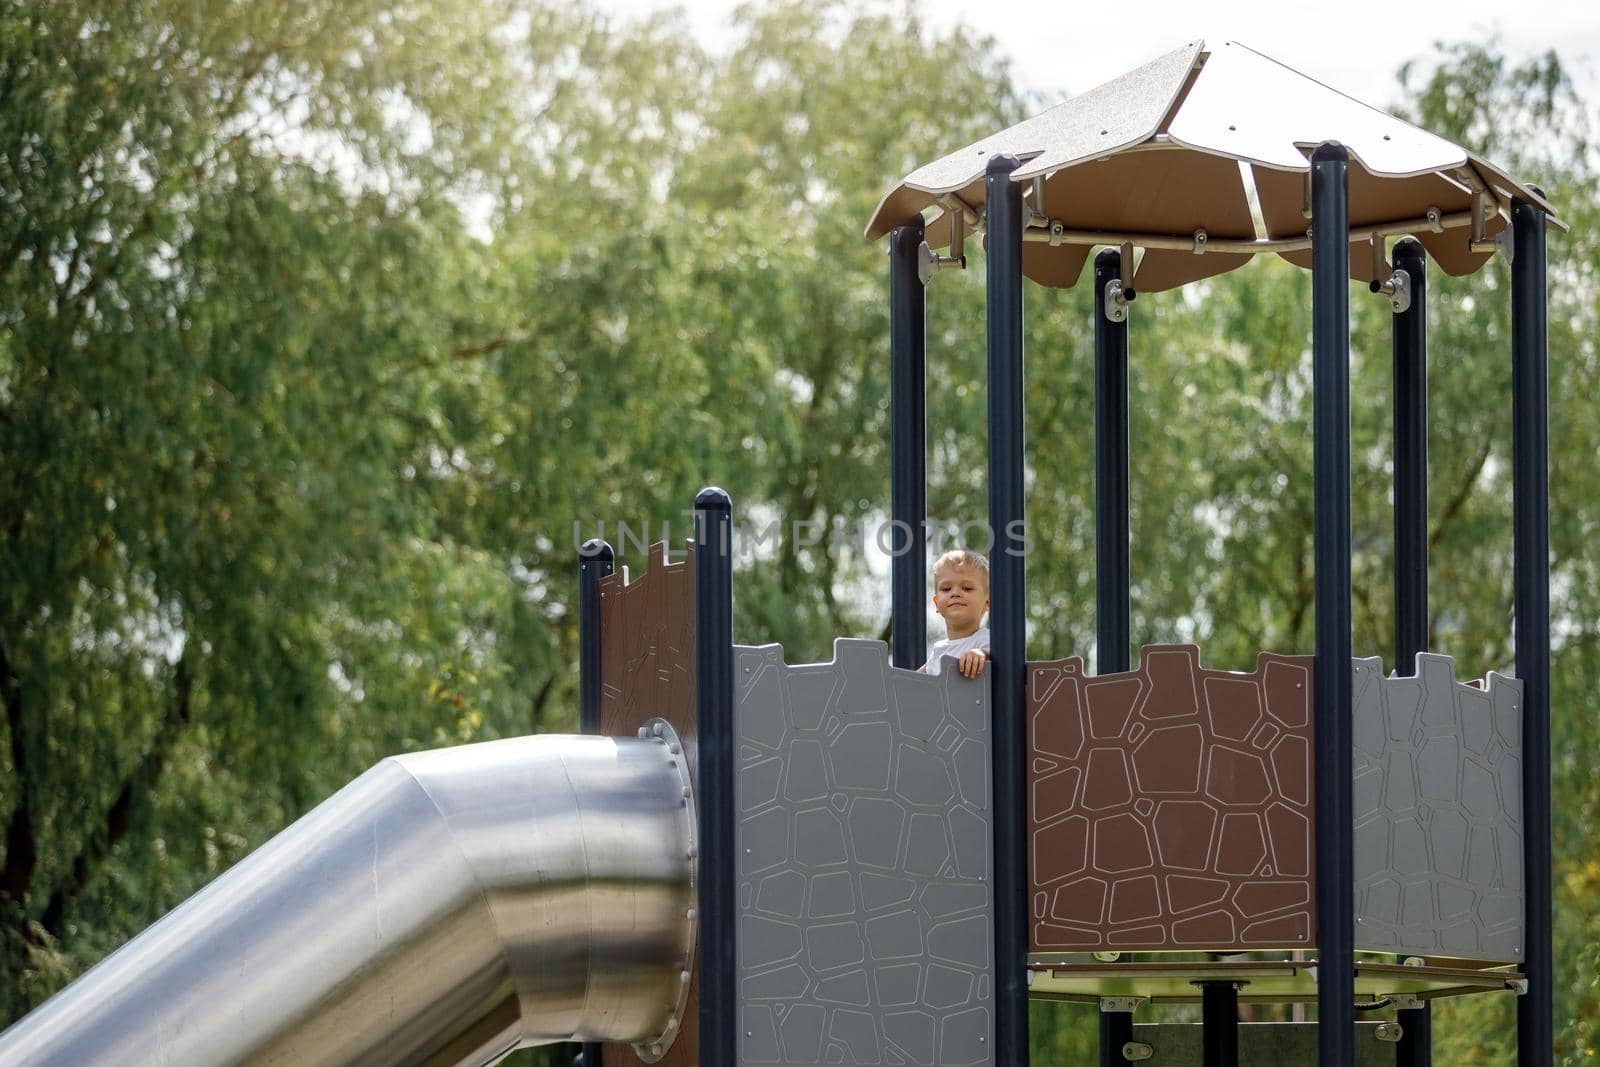 A little boy in the high observation tower of the playground prepares to slide through a metal tunnel. Beautiful background of green, tall trees.